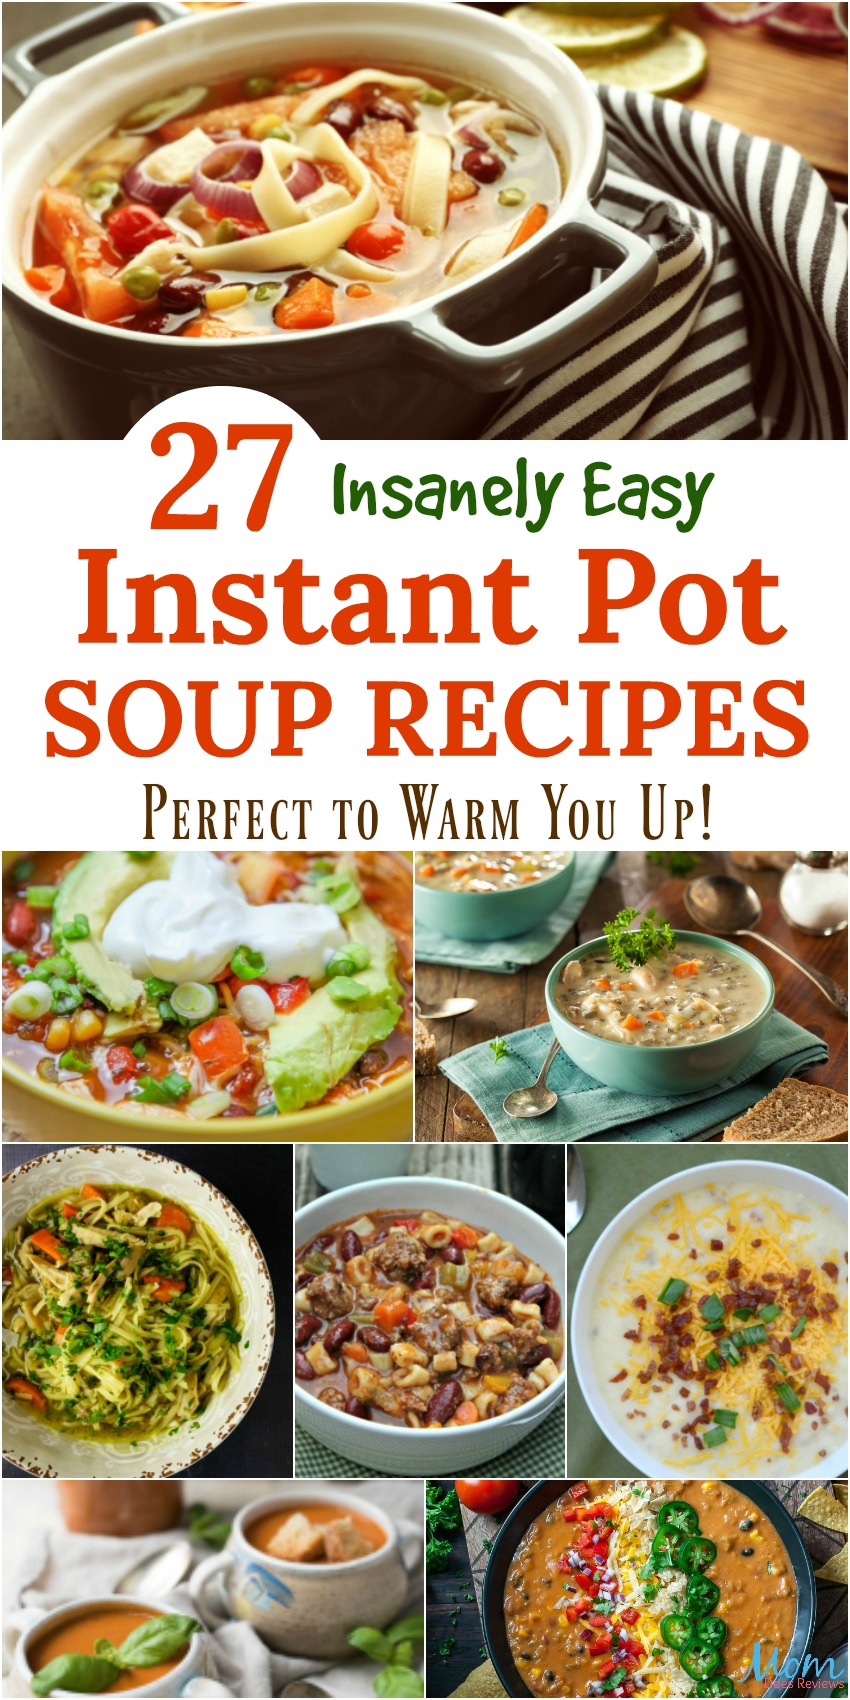 27 Insanely Easy Instant Pot Soup Recipes Perfect to Warm You Up